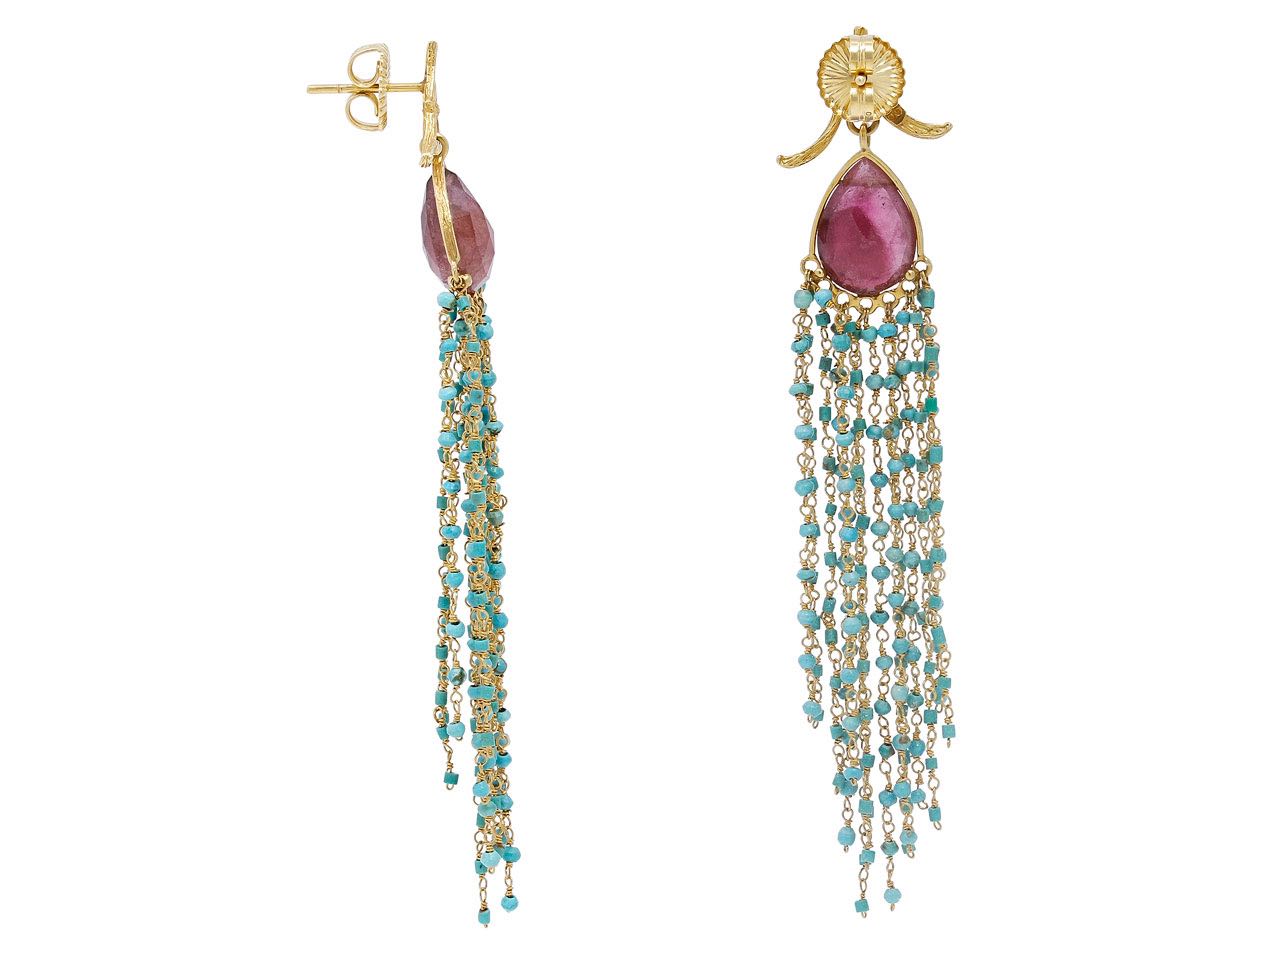 K. Brunini Tourmaline and Turquoise Cascade Earrings in 18K Gold